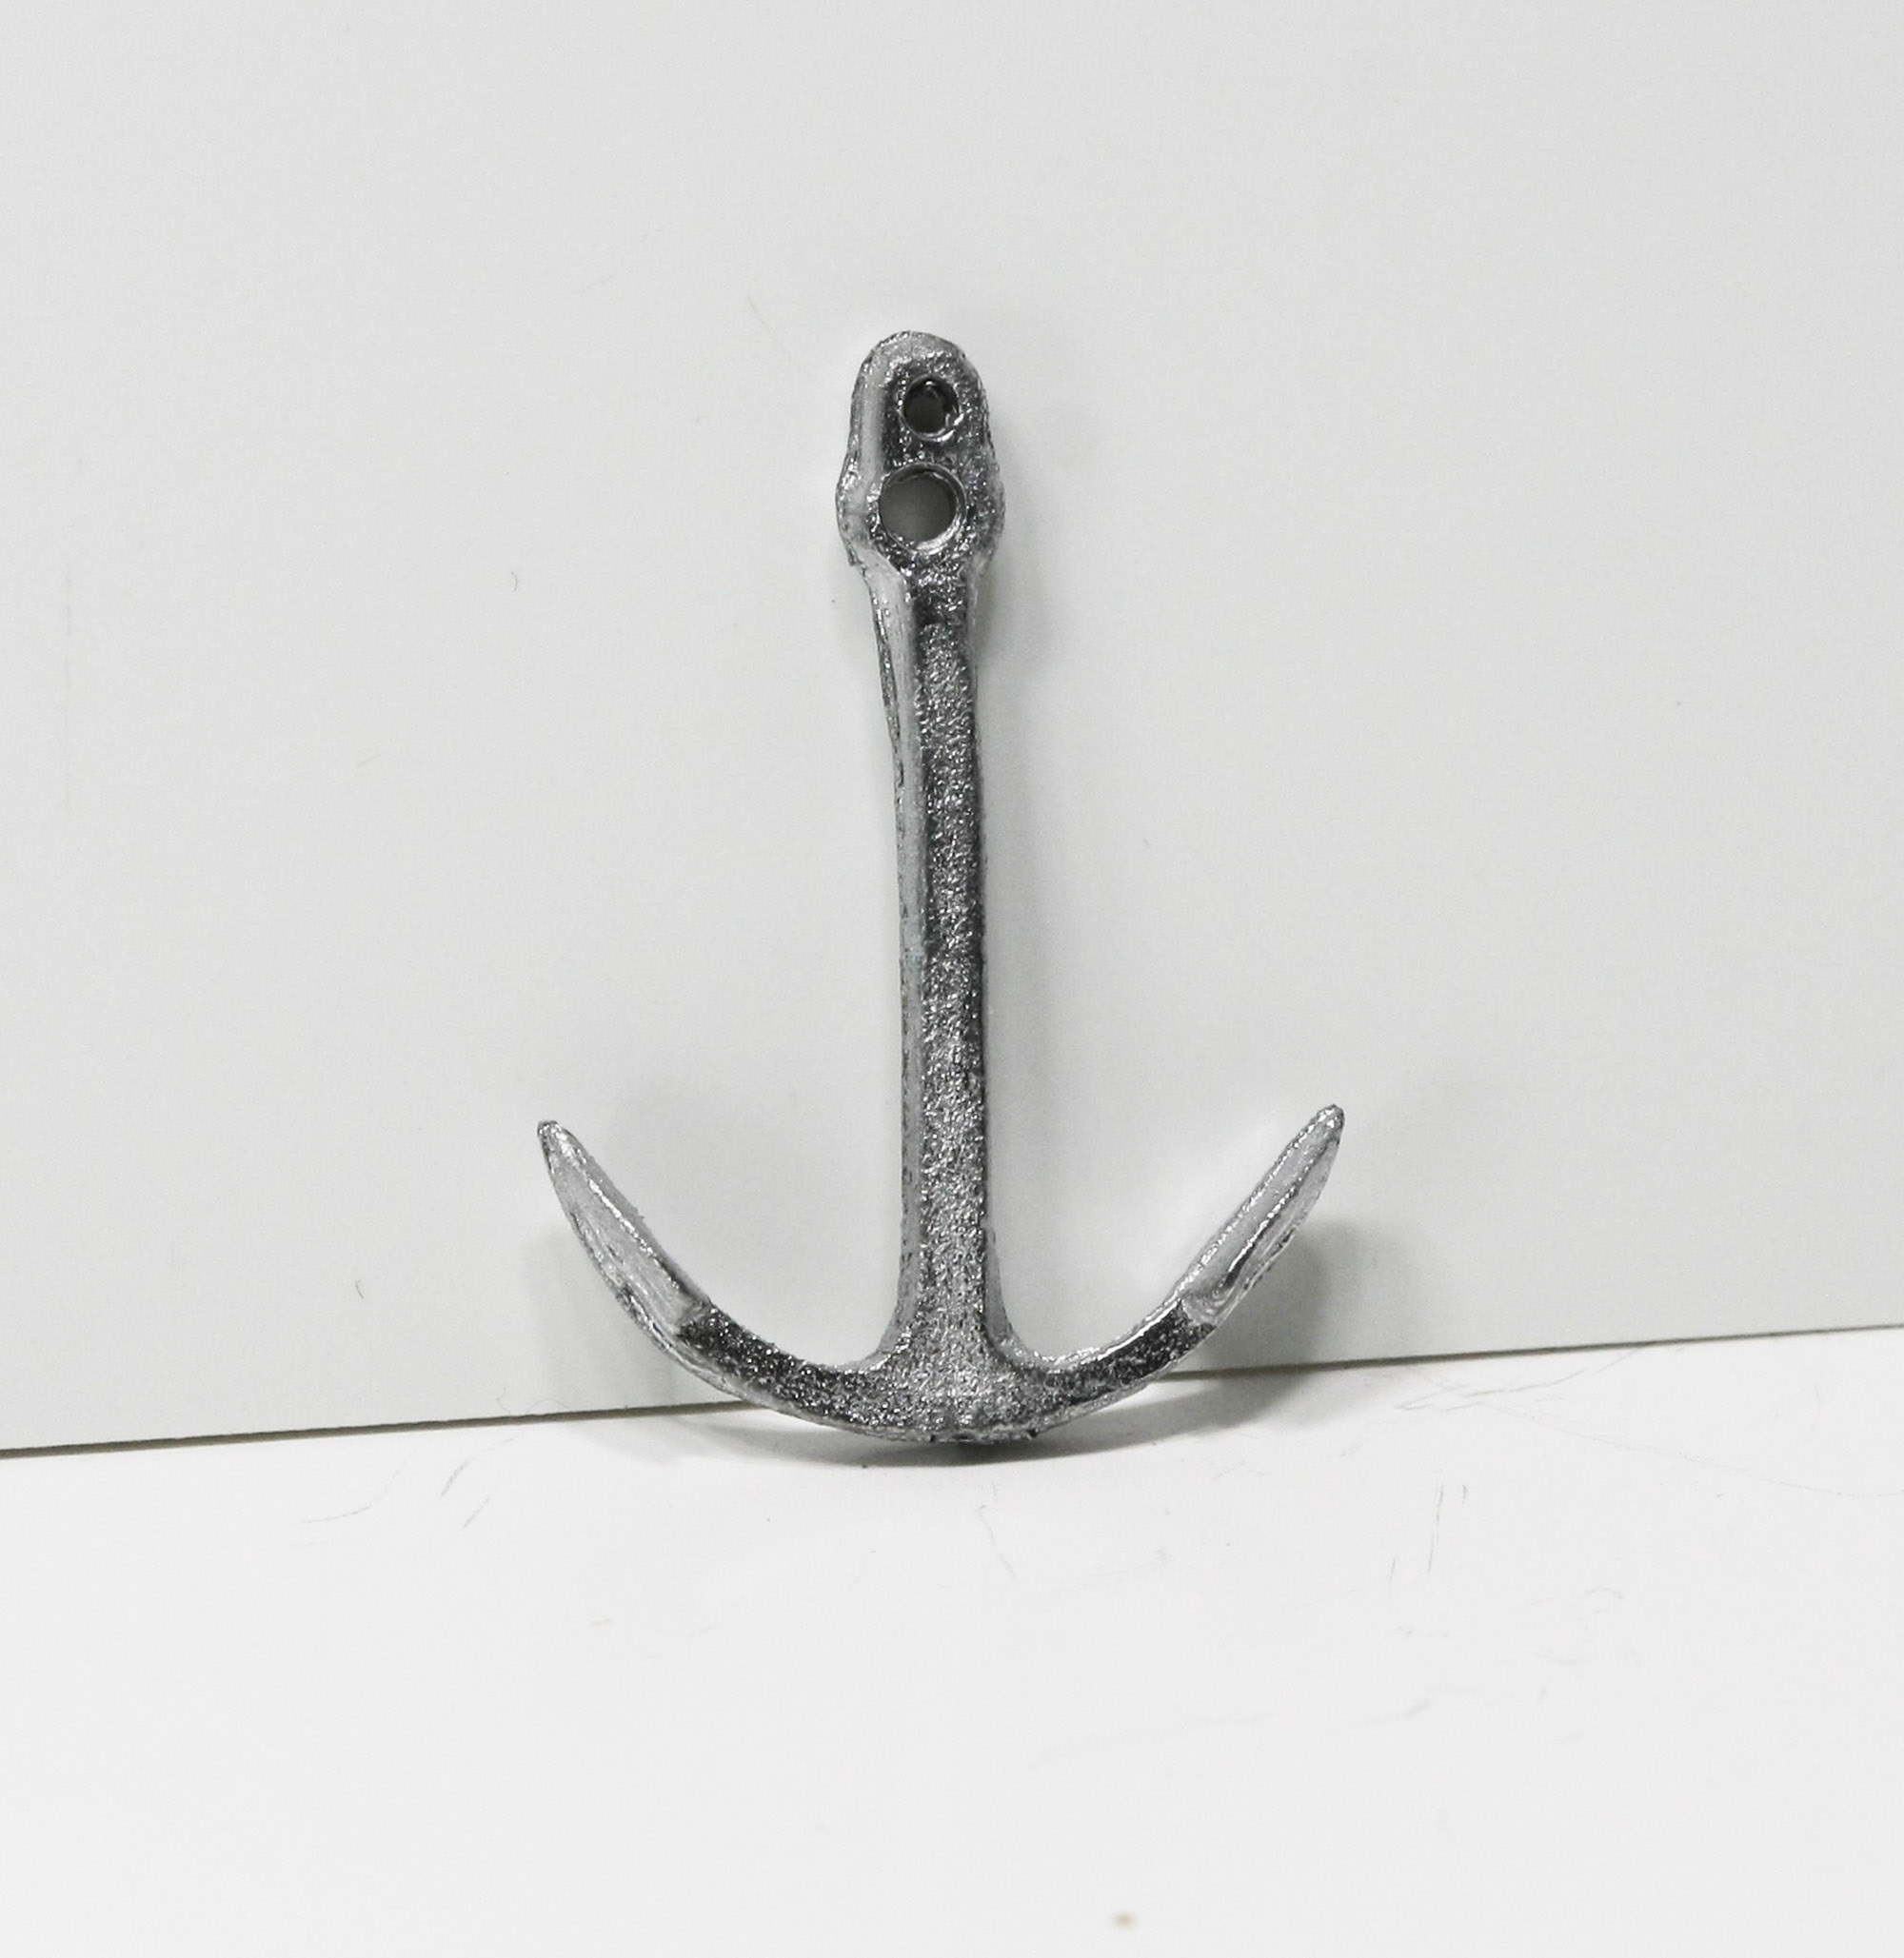 Small Boat Anchor by Island Crafts and Miniatures k6e - Dollhouses and More